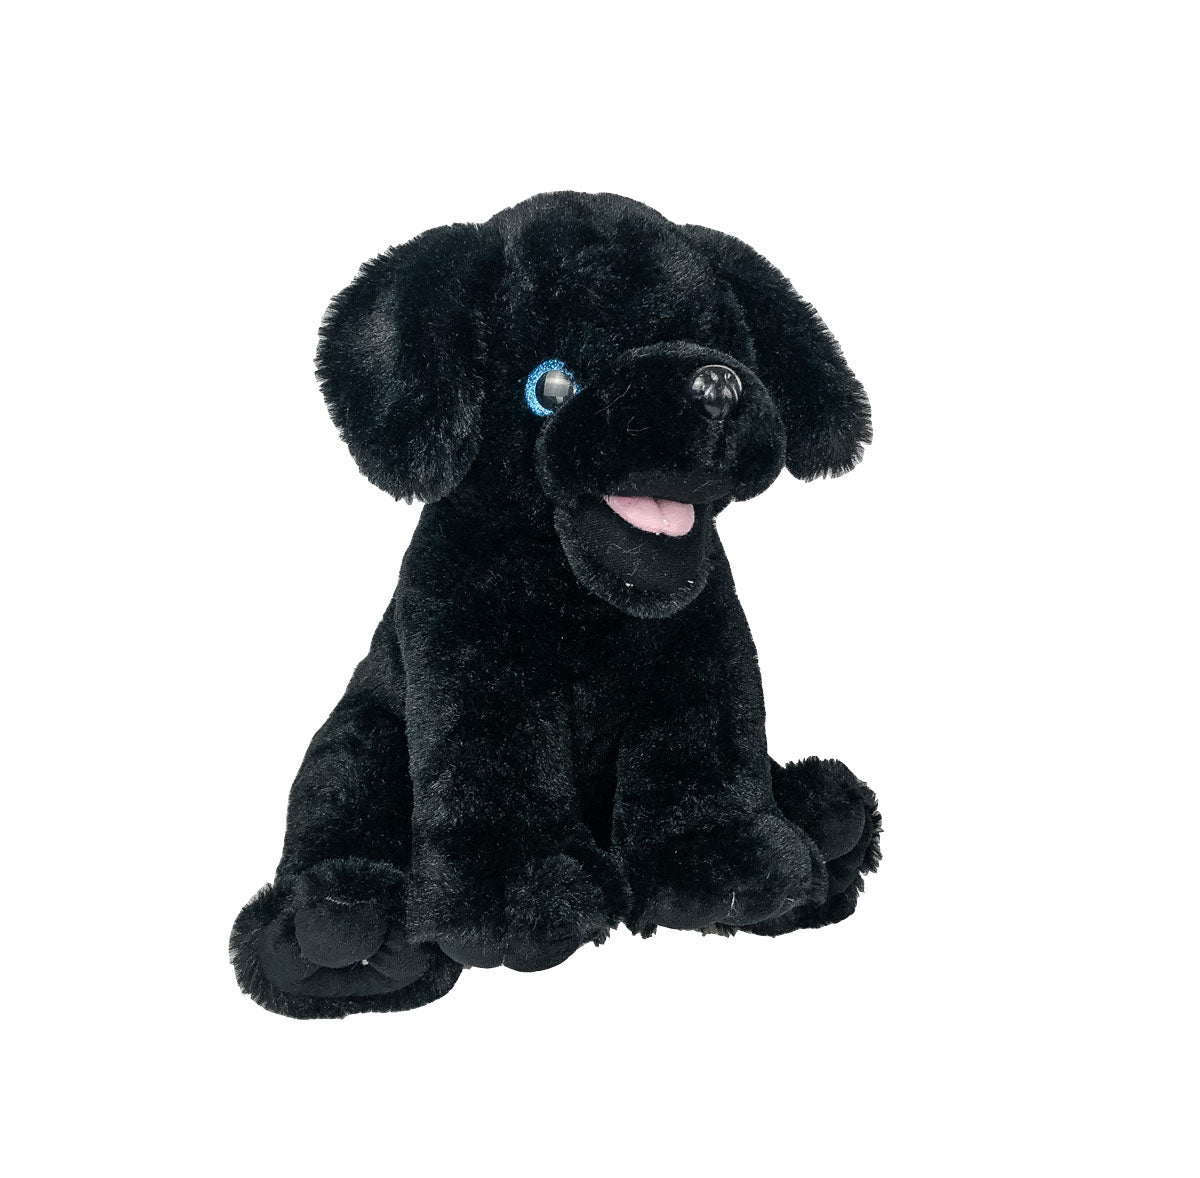 Black Lab Stuffed Animal 16 inches and super soft!